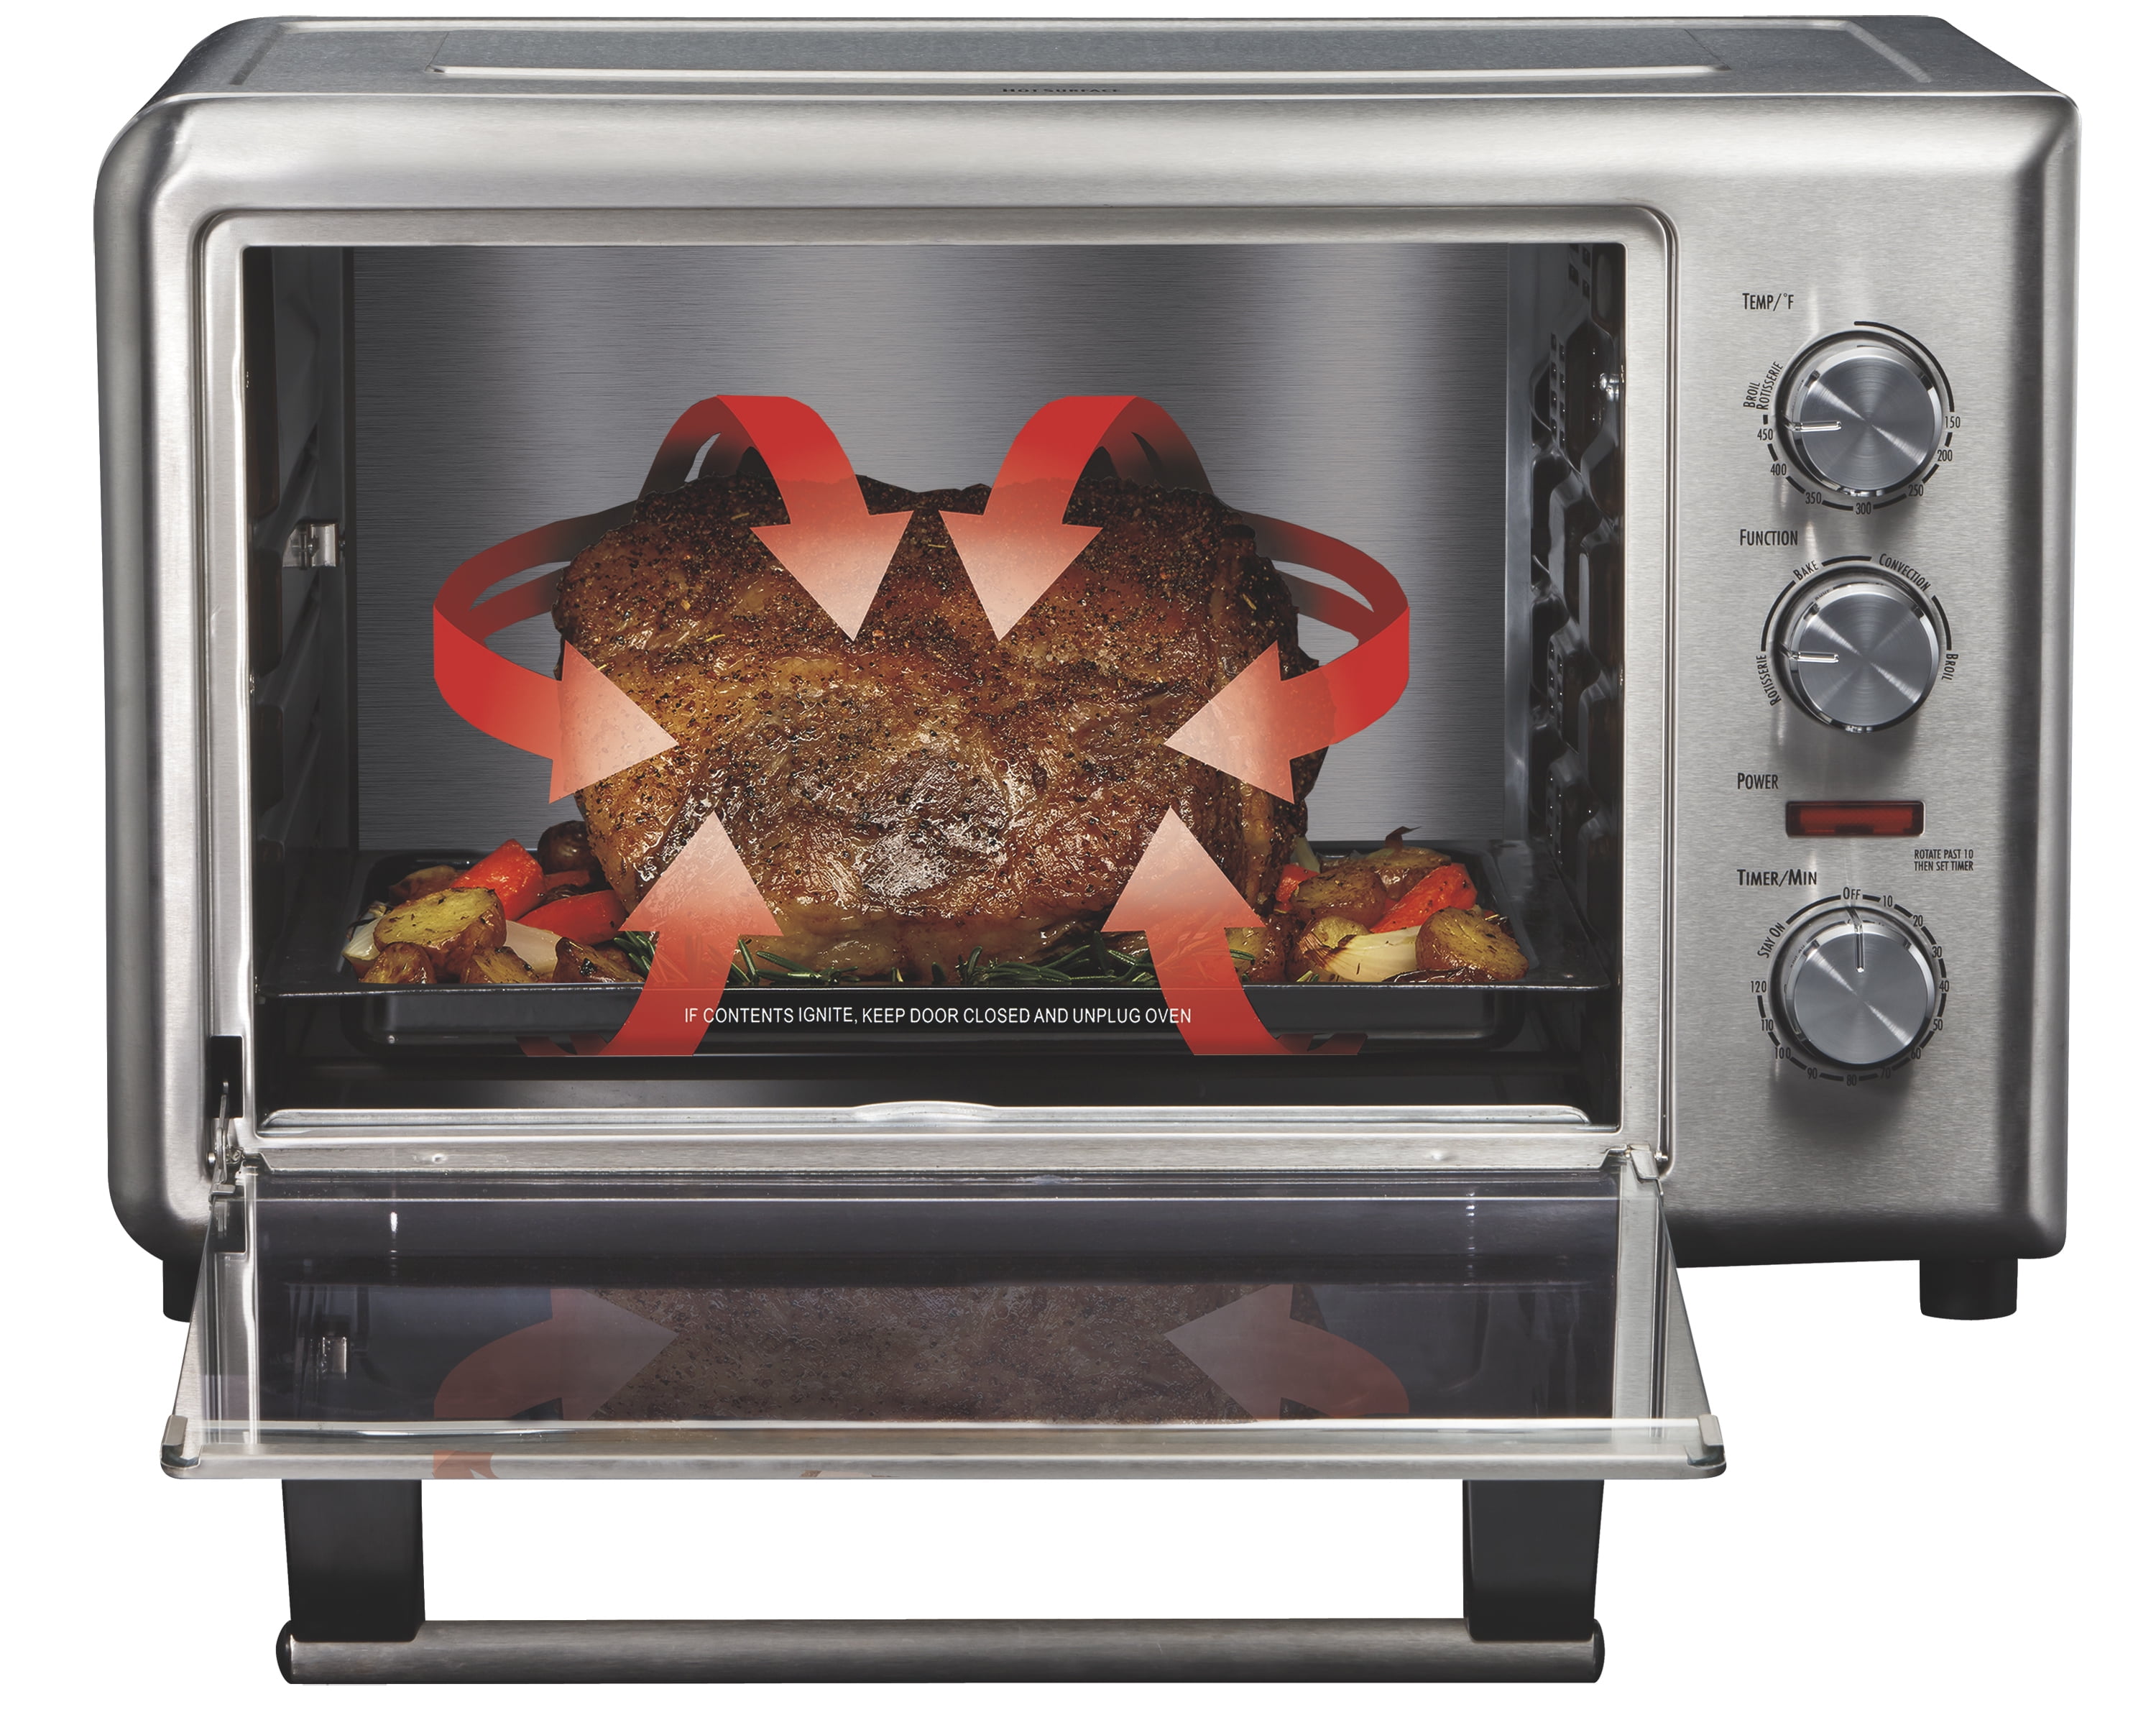 Hamilton Beach Countertop Oven with Convection and Rotisserie - 31103D